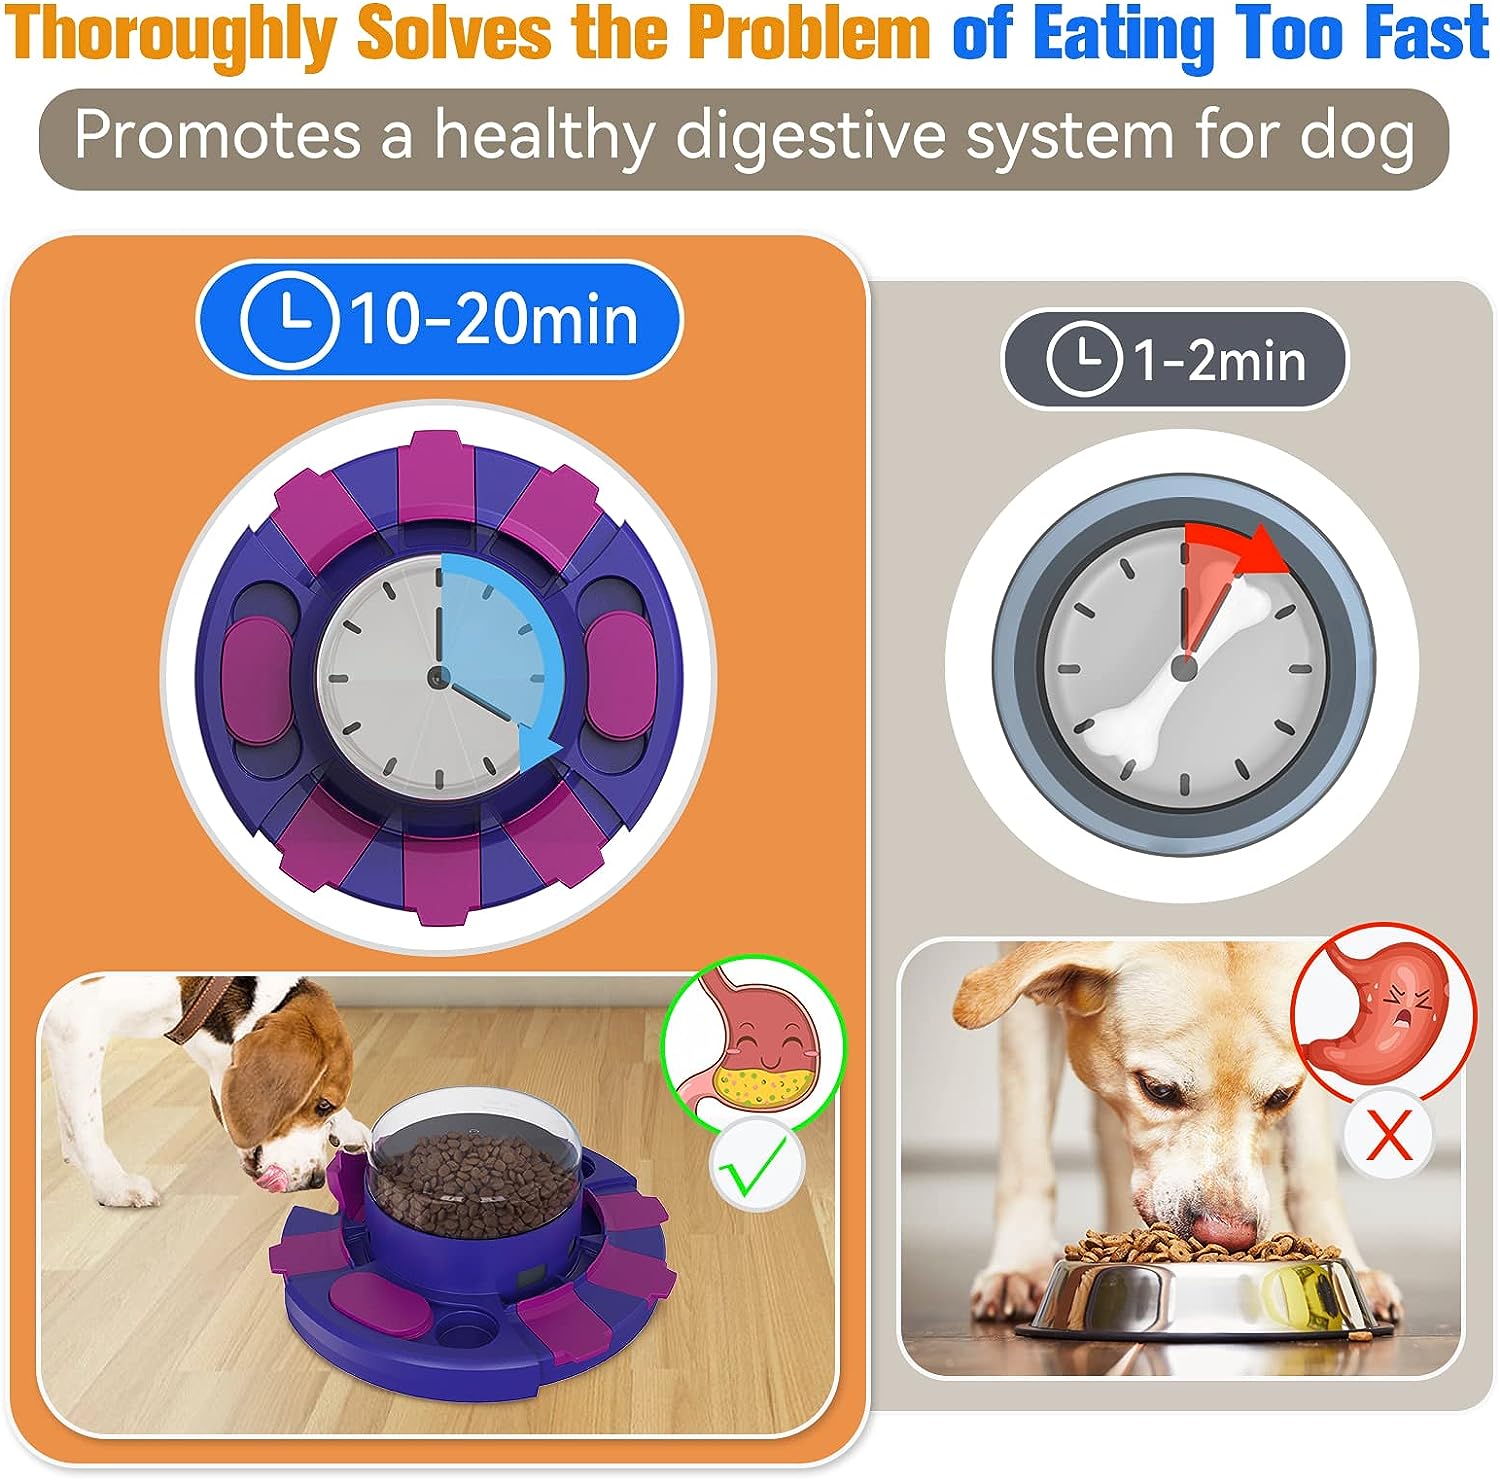 KADTC Puzzle Toys for Dog Boredom and Mentally Stimulating Slow Food Treat Feeder Button Dispenser Keep Busy Pet Bowl Puppy Brain Mental Stimulation Toy Level 2 1 Small/Medium/Large Interactive Game